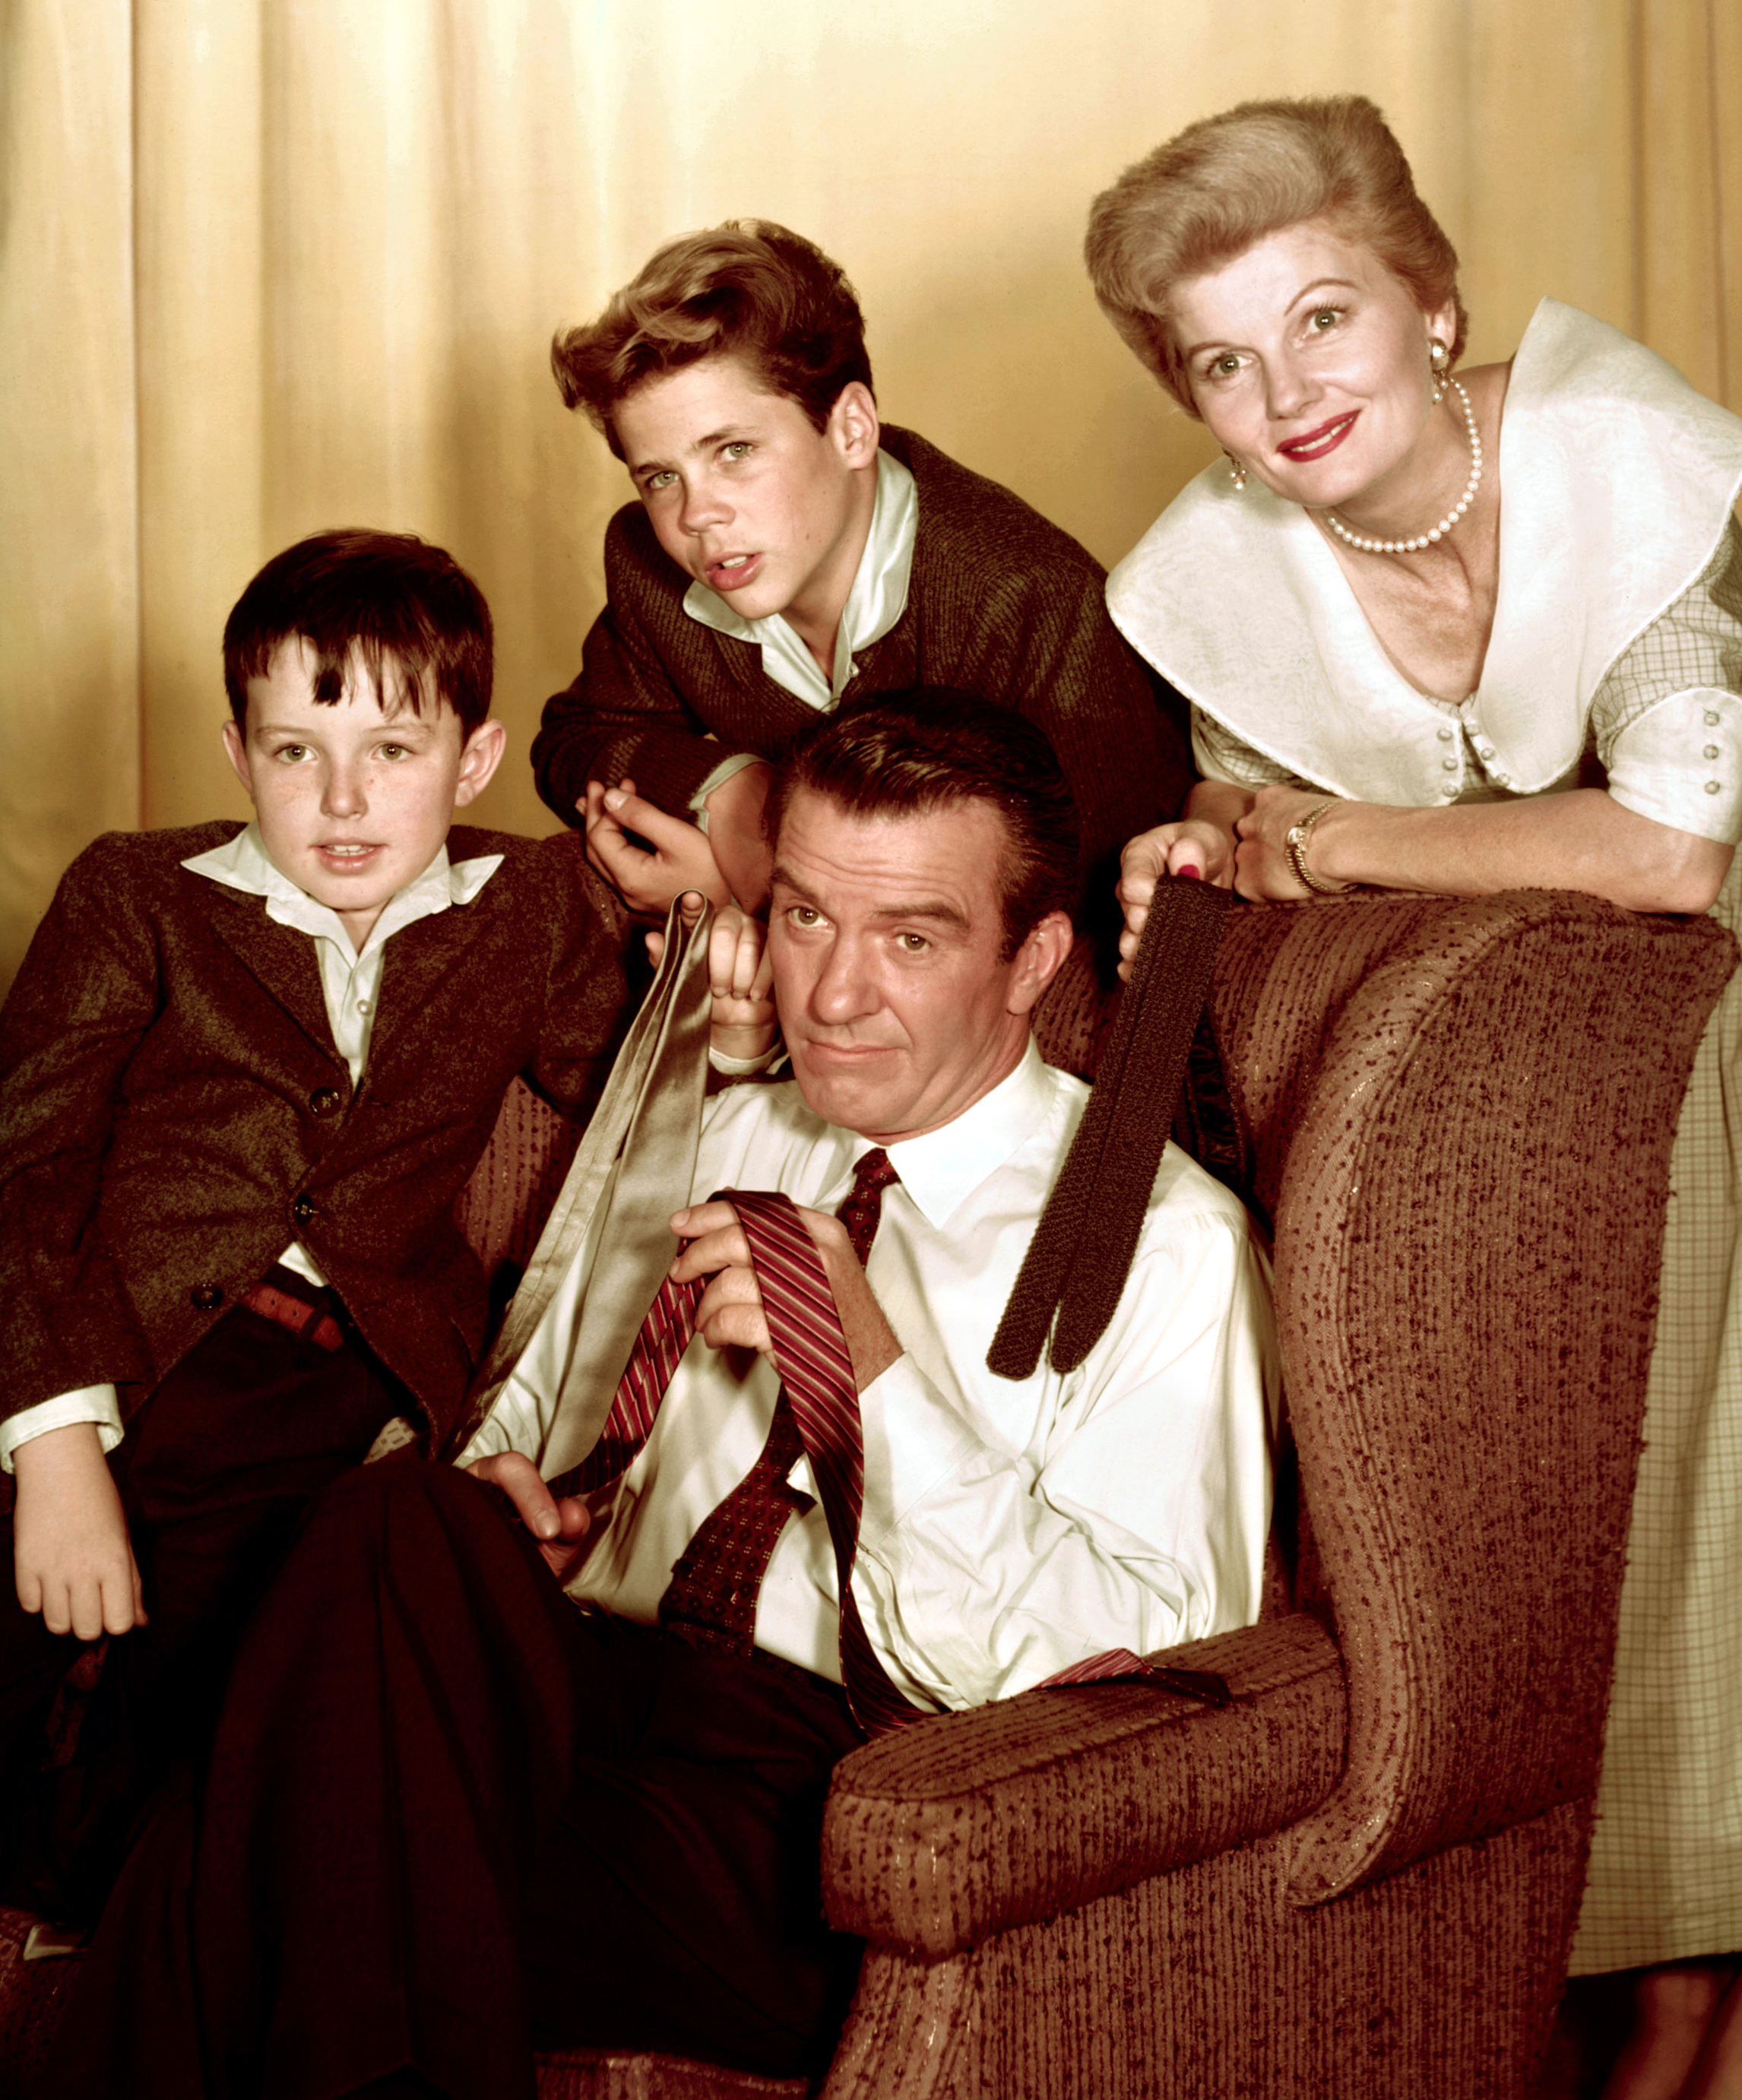 Jerry Mathers, Hugh Beaumont, Tony Dow, and Barbara Billingsley as their characters from "Leave It to Beaver" in Los Angeles, 1957 | Source: Getty Images